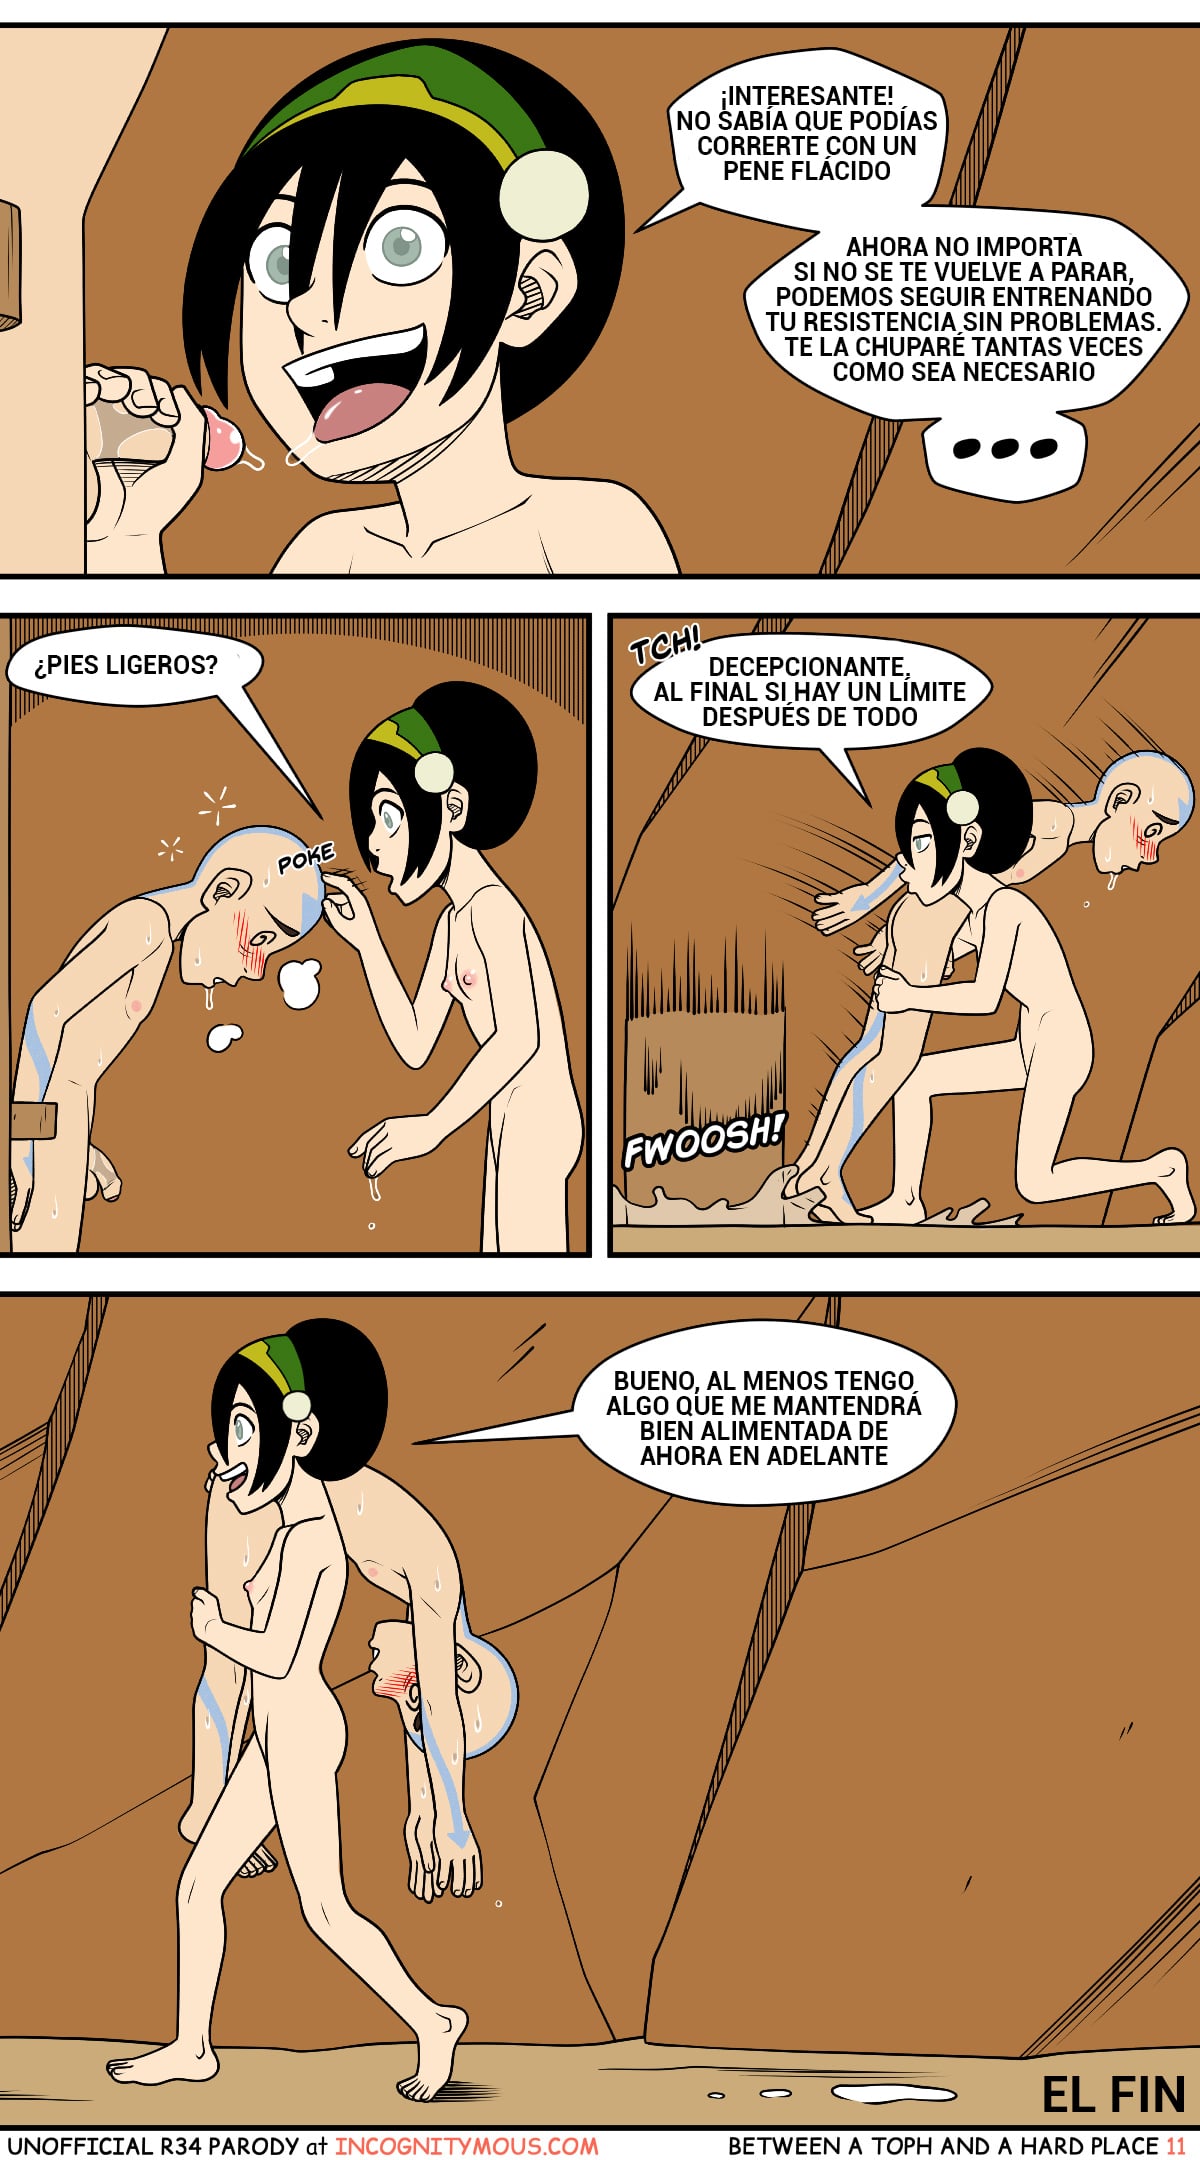 Between a Toph and a Hard Place - 11